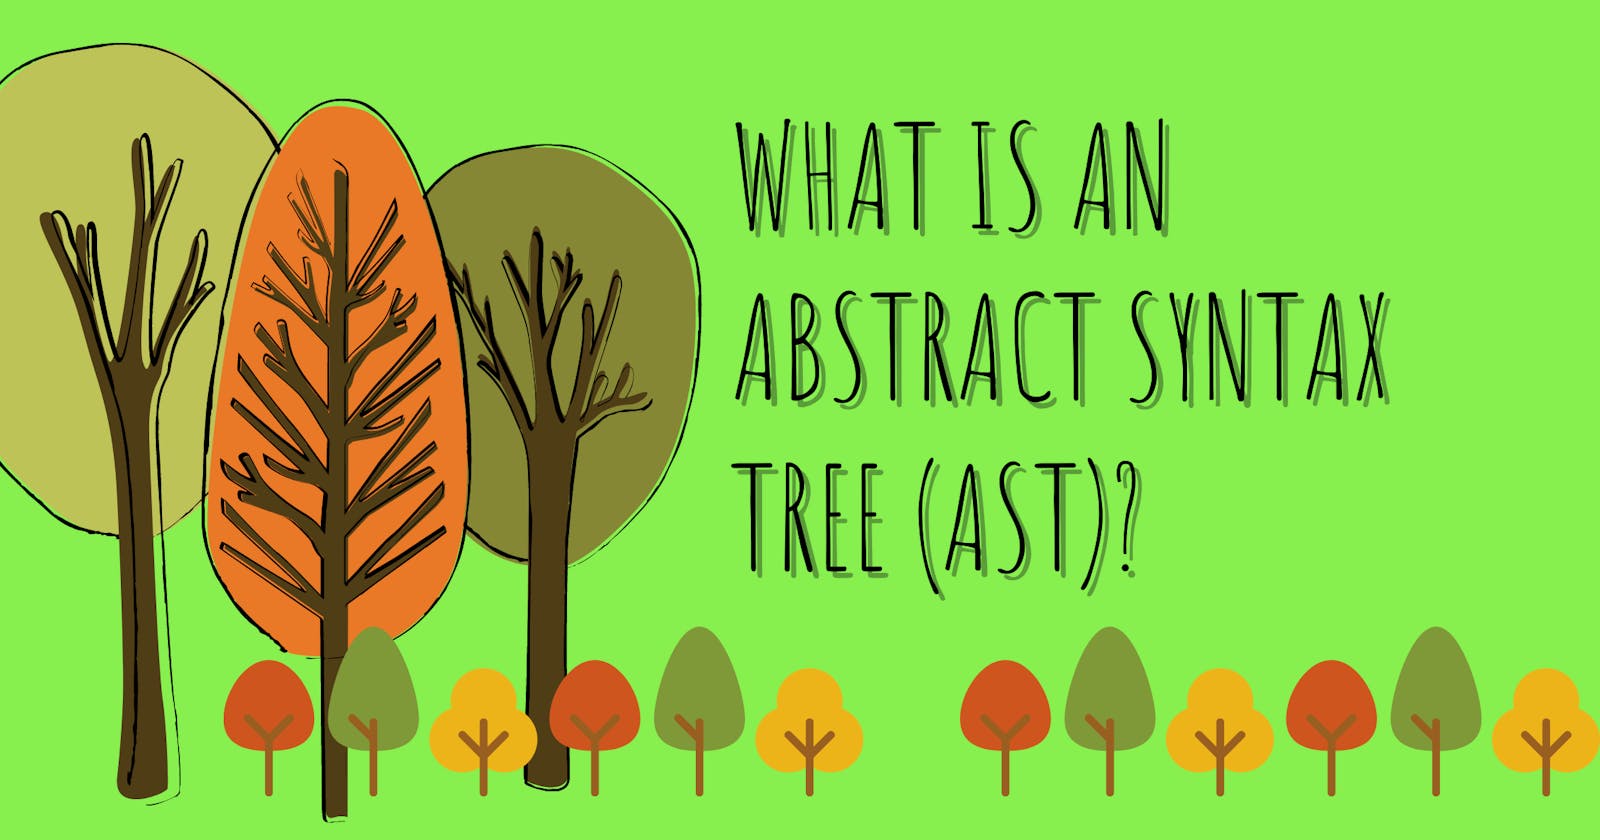 Abstract Syntax Tree (AST) - Explained in Plain English